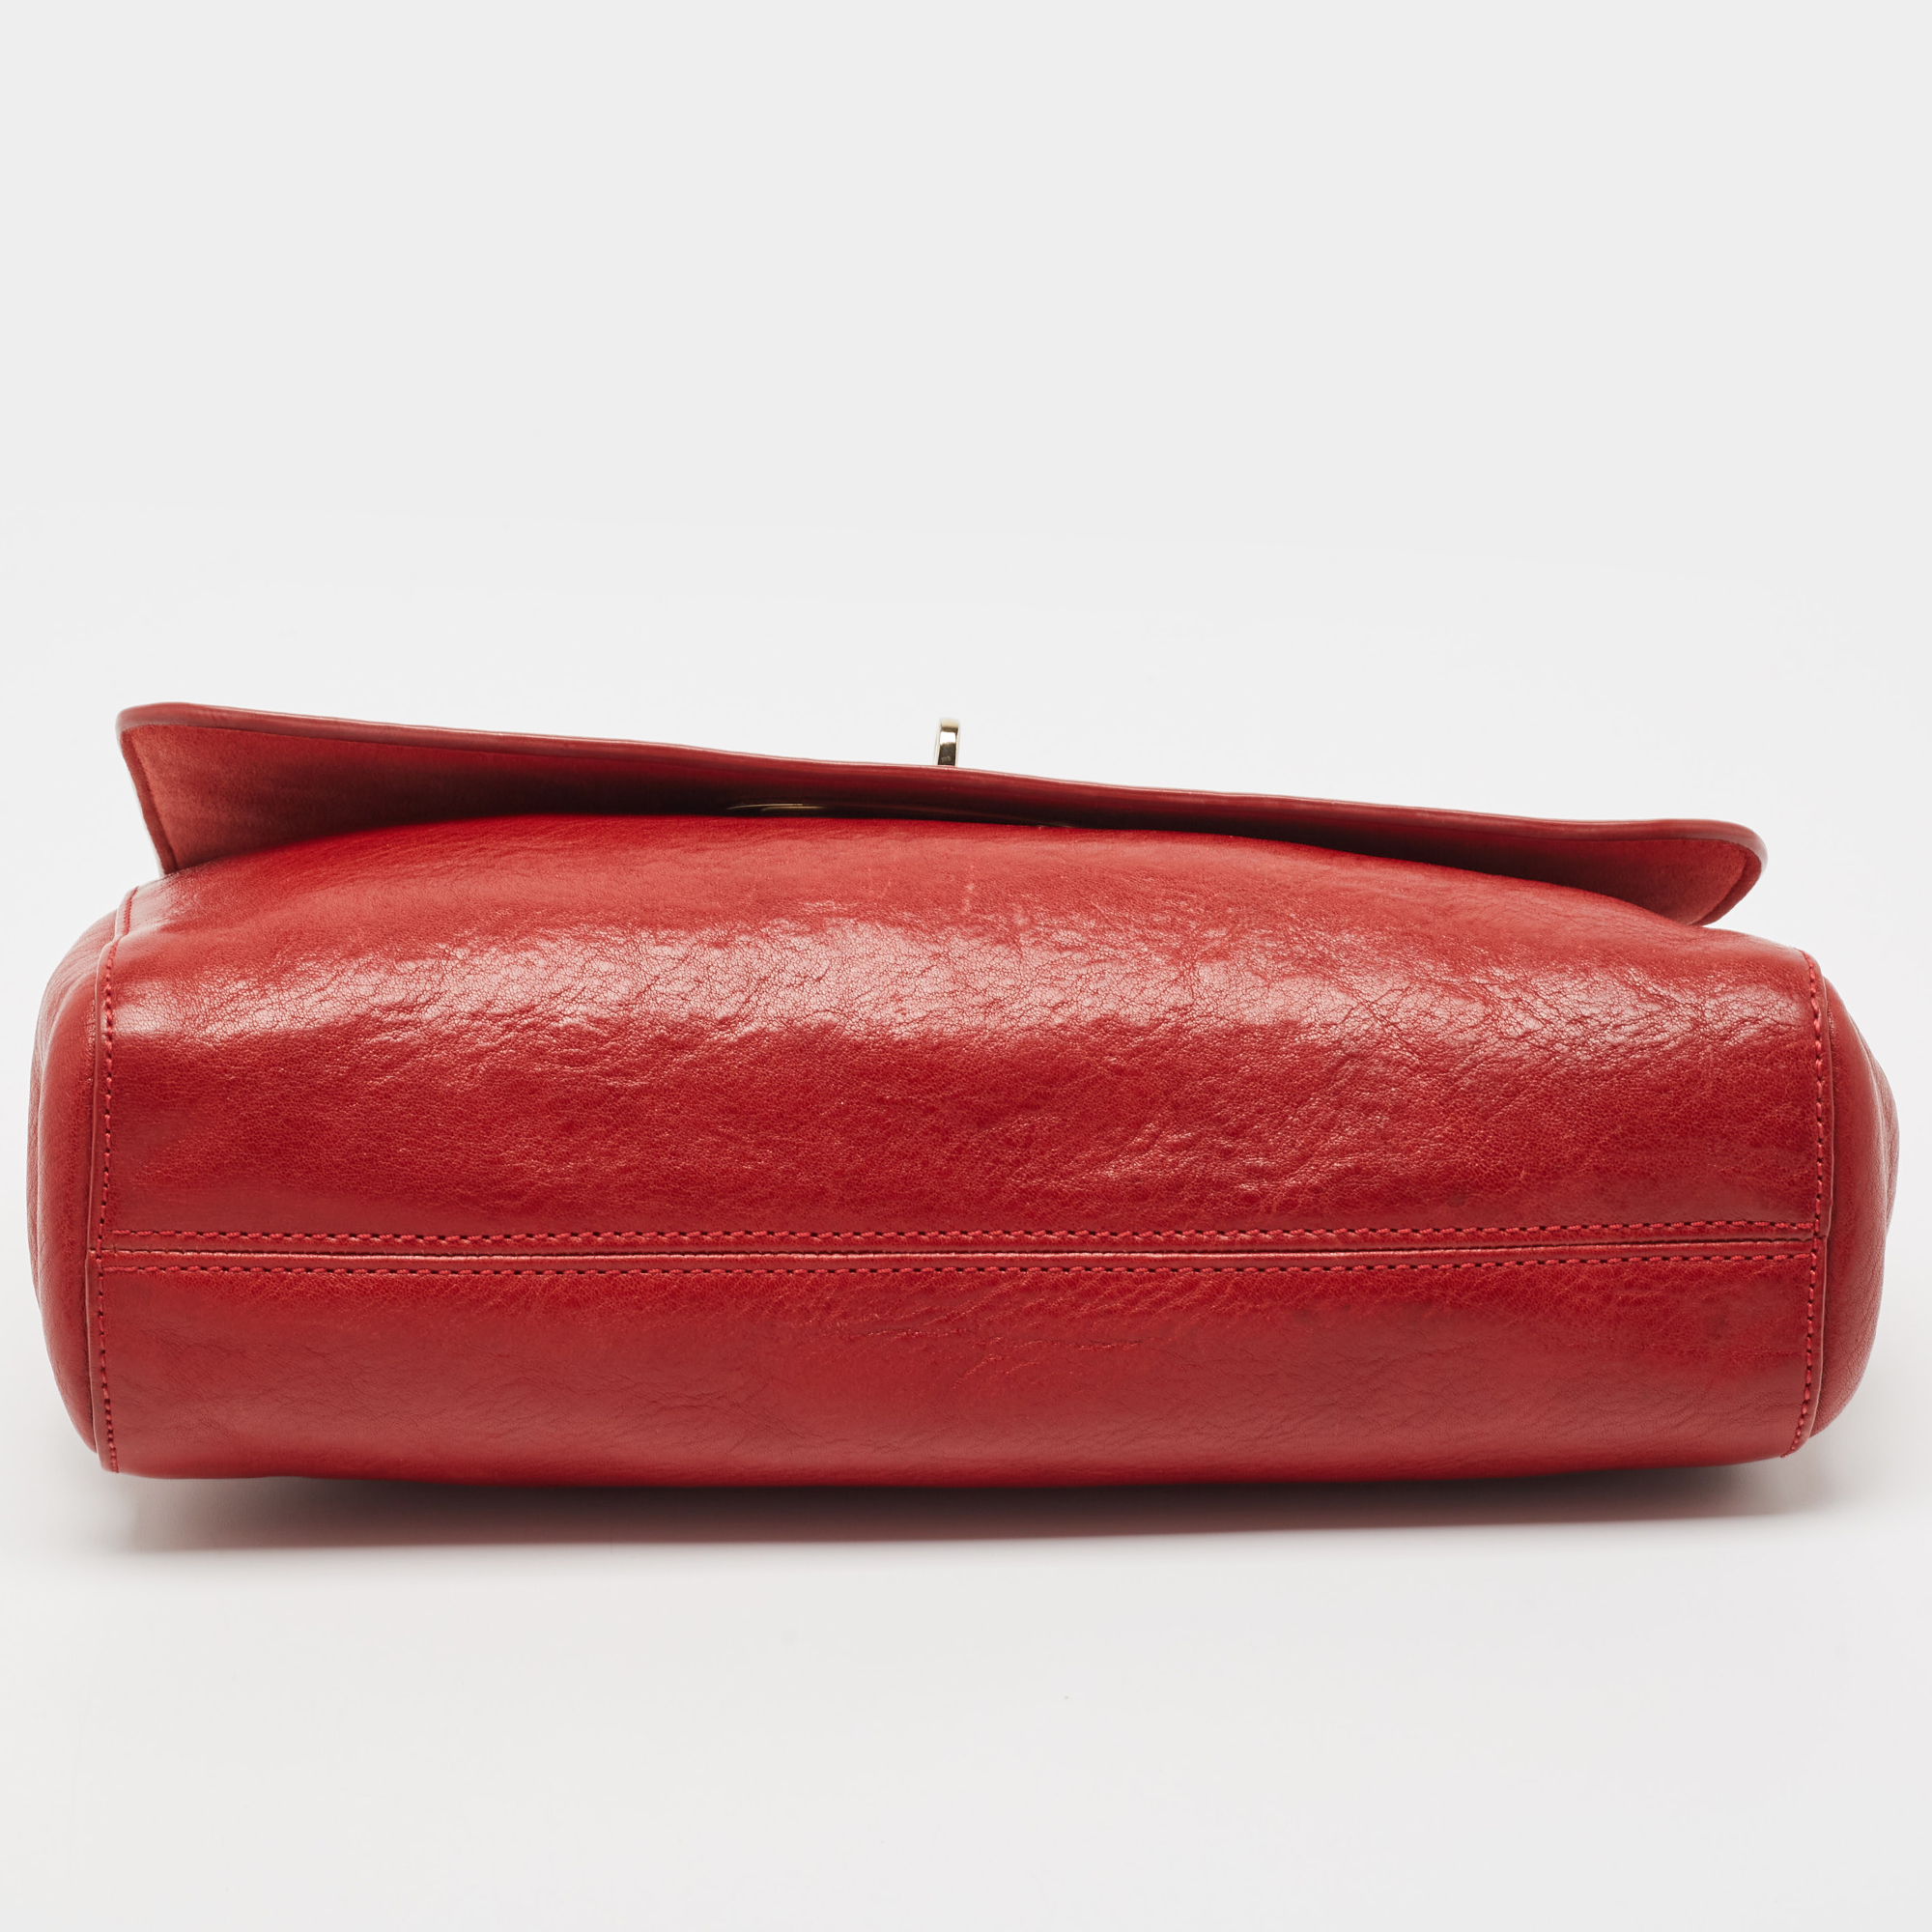 Mulberry Red Leather Medium Lily Shoulder Bag